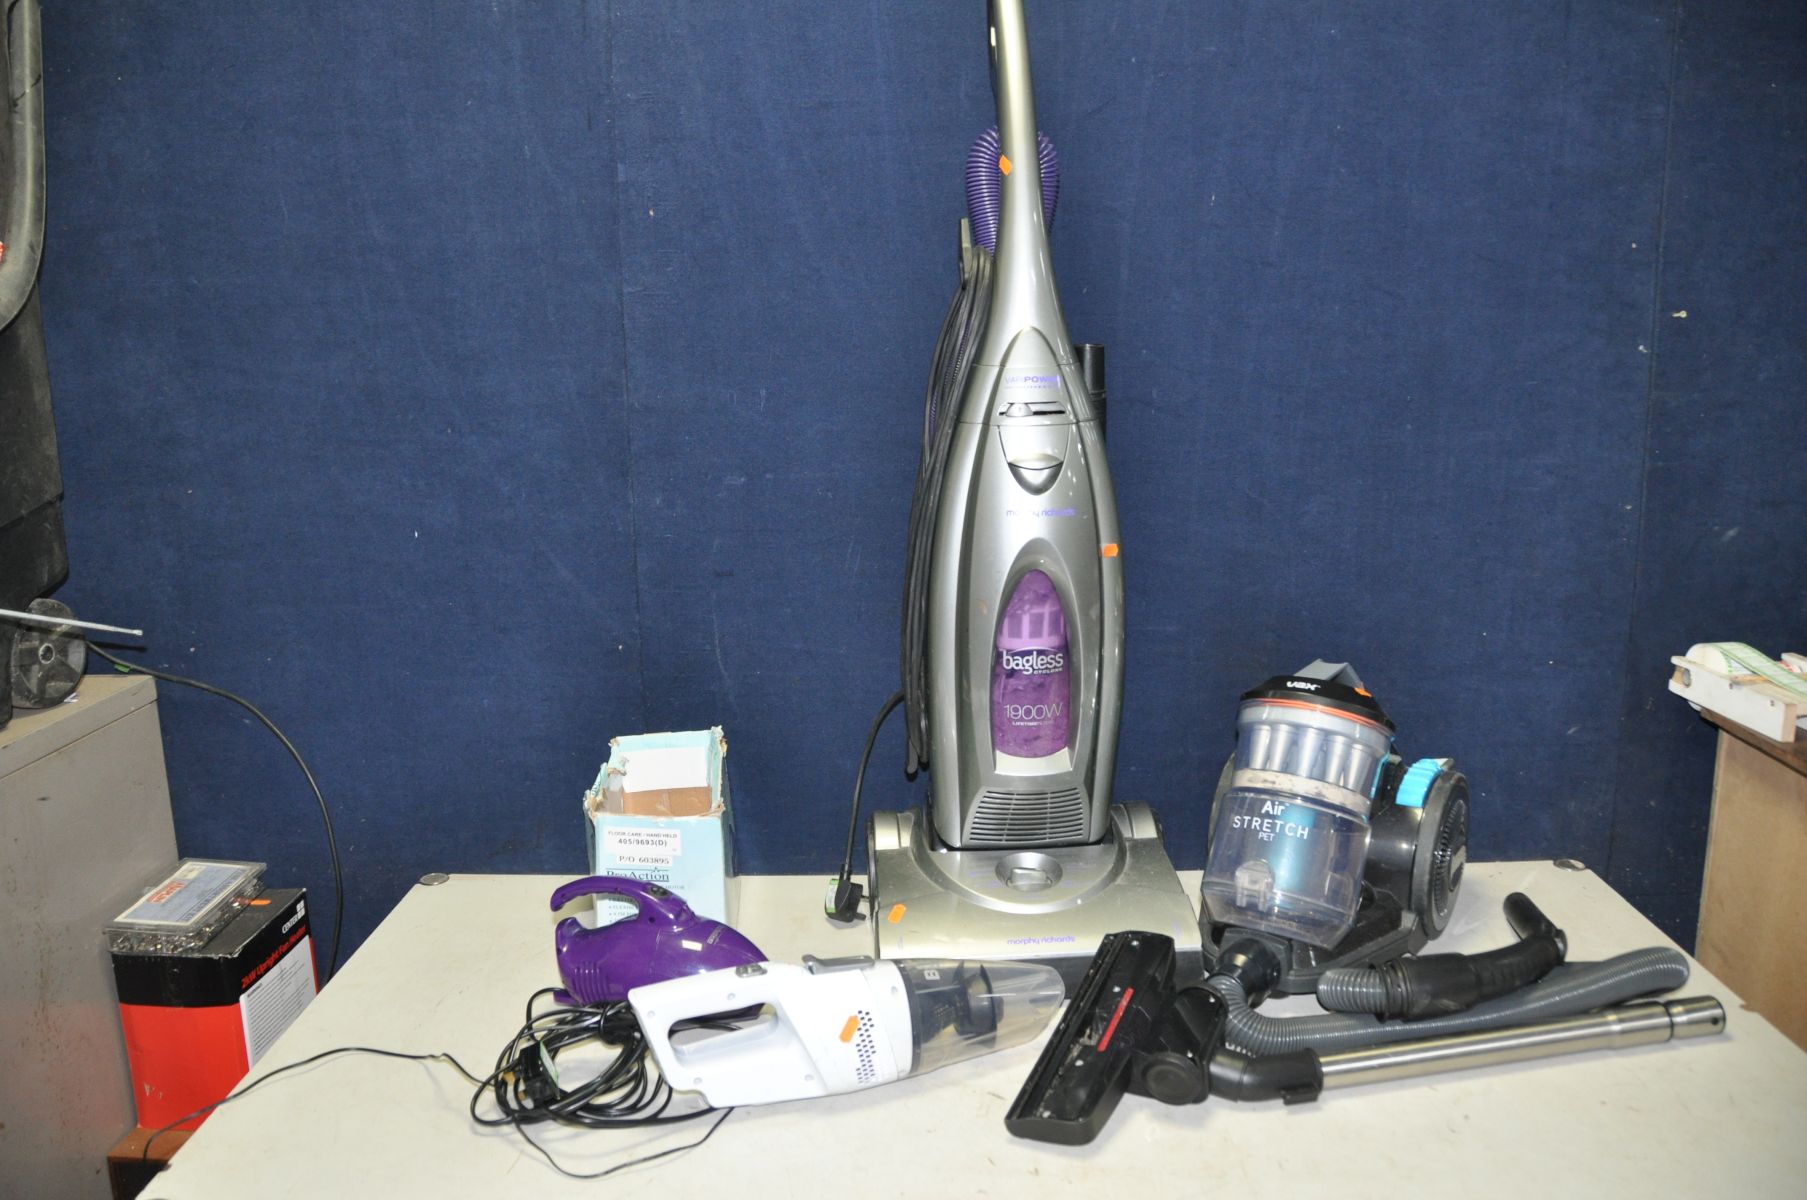 A VAX PULL ALONG VACUUM CLEANER, a Morphy Richards upright vacuum cleaner, a Pro Action hand held